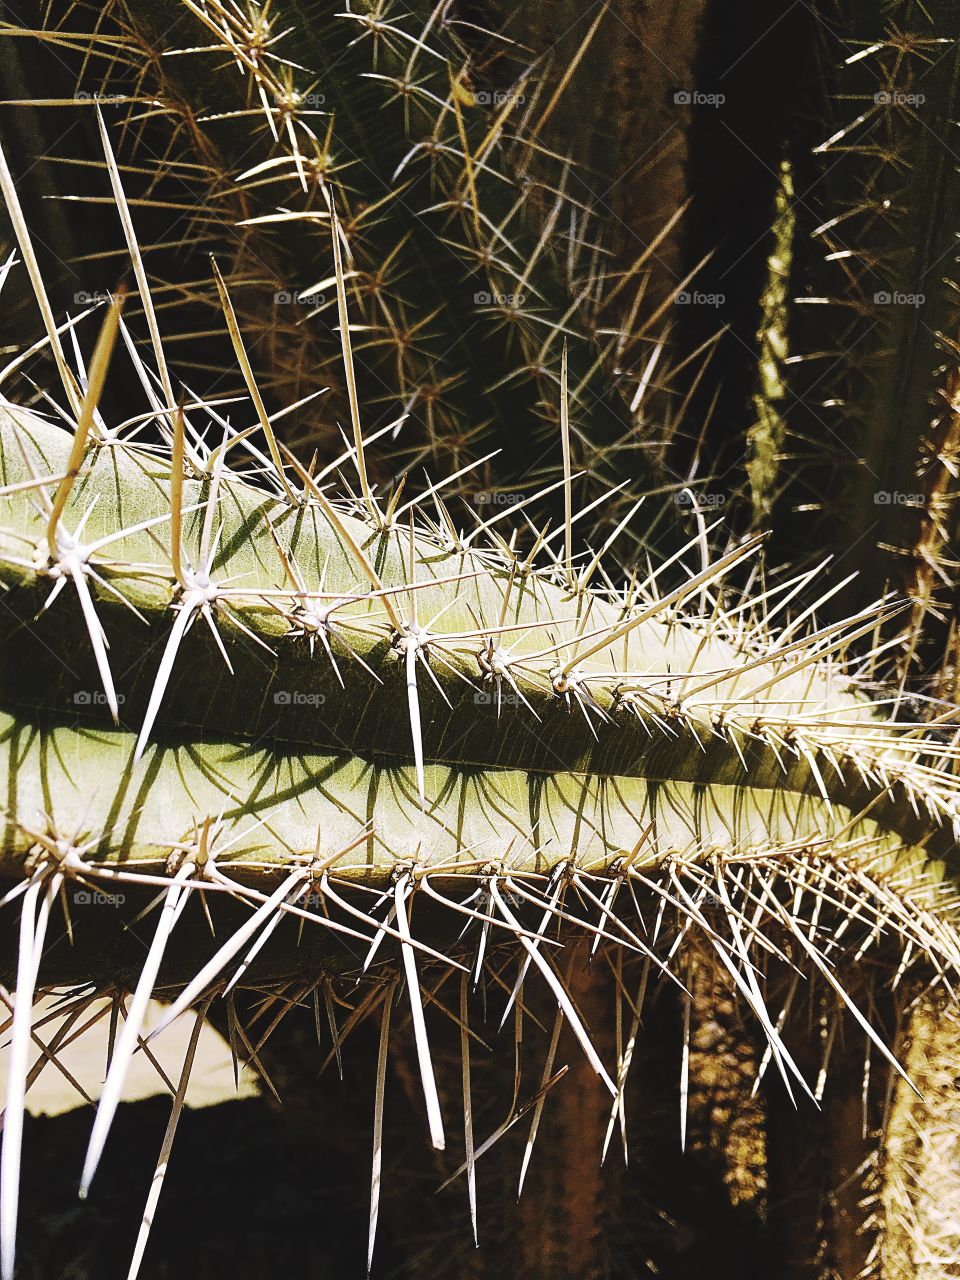 Don’t get too close!  Close up view of prickly, sharp cactus.  The barbs are very long and dangerous! 